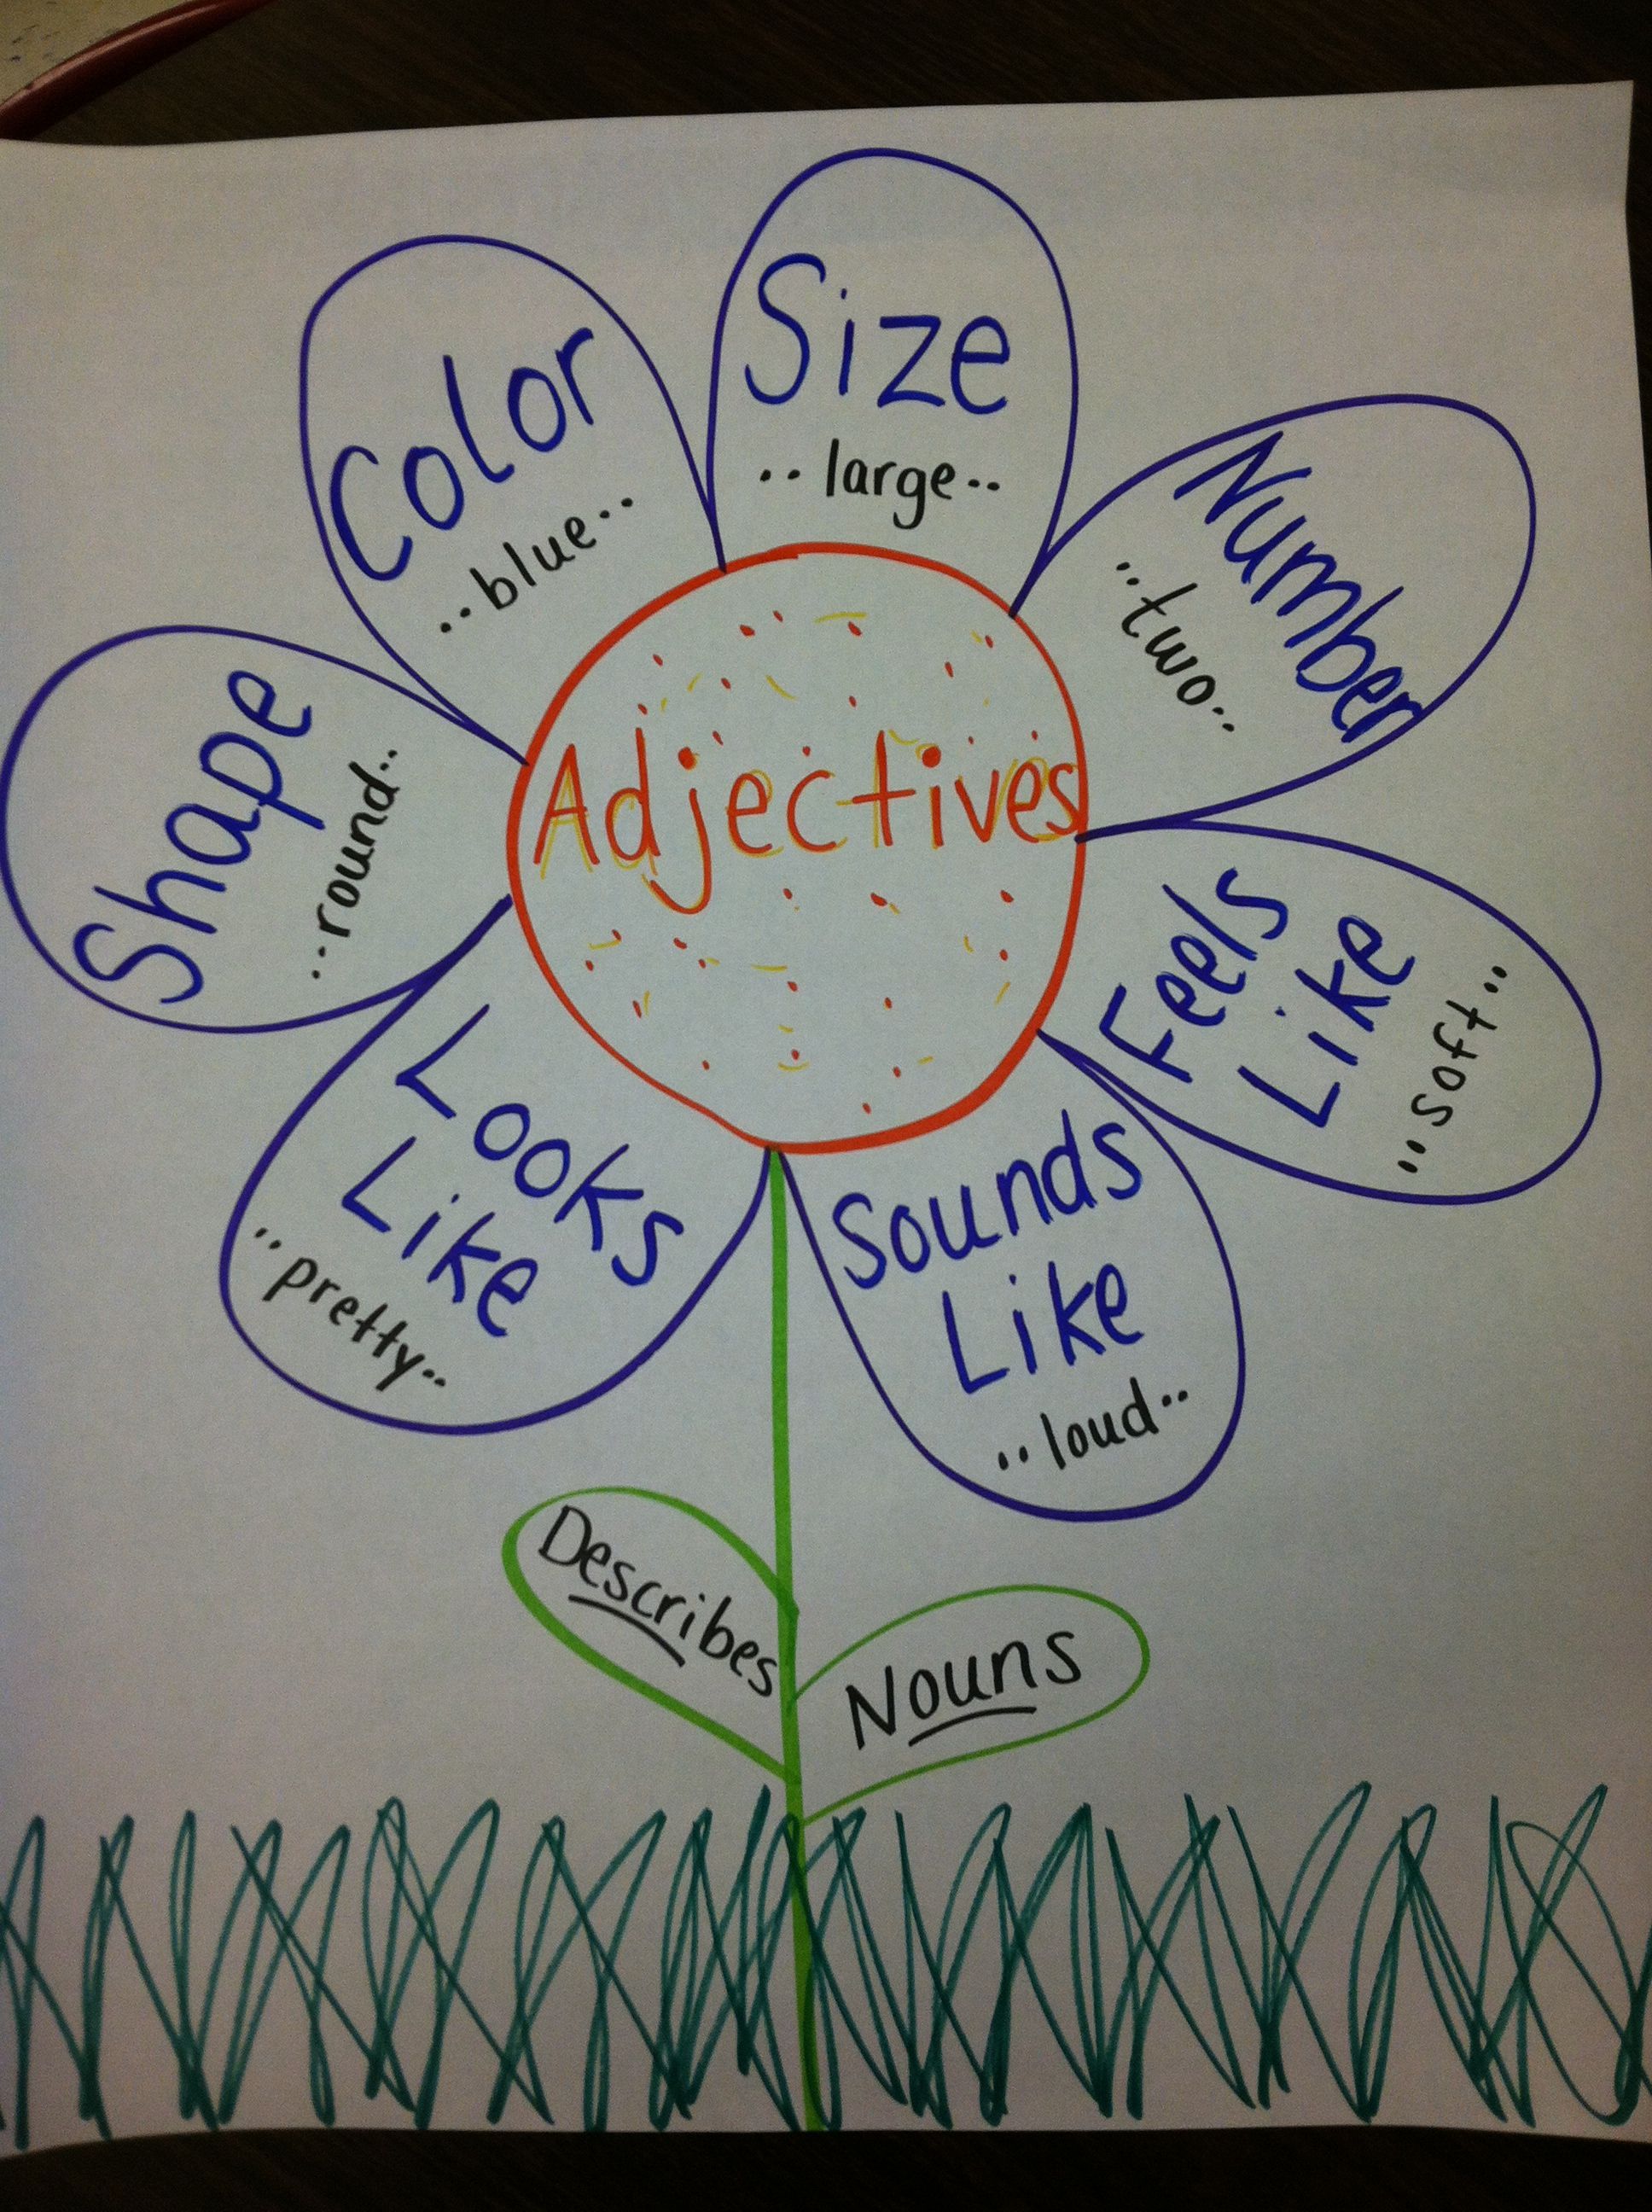 Adjective Anchor Chart. Check out the blog that has lots of anchor charts for second grade!